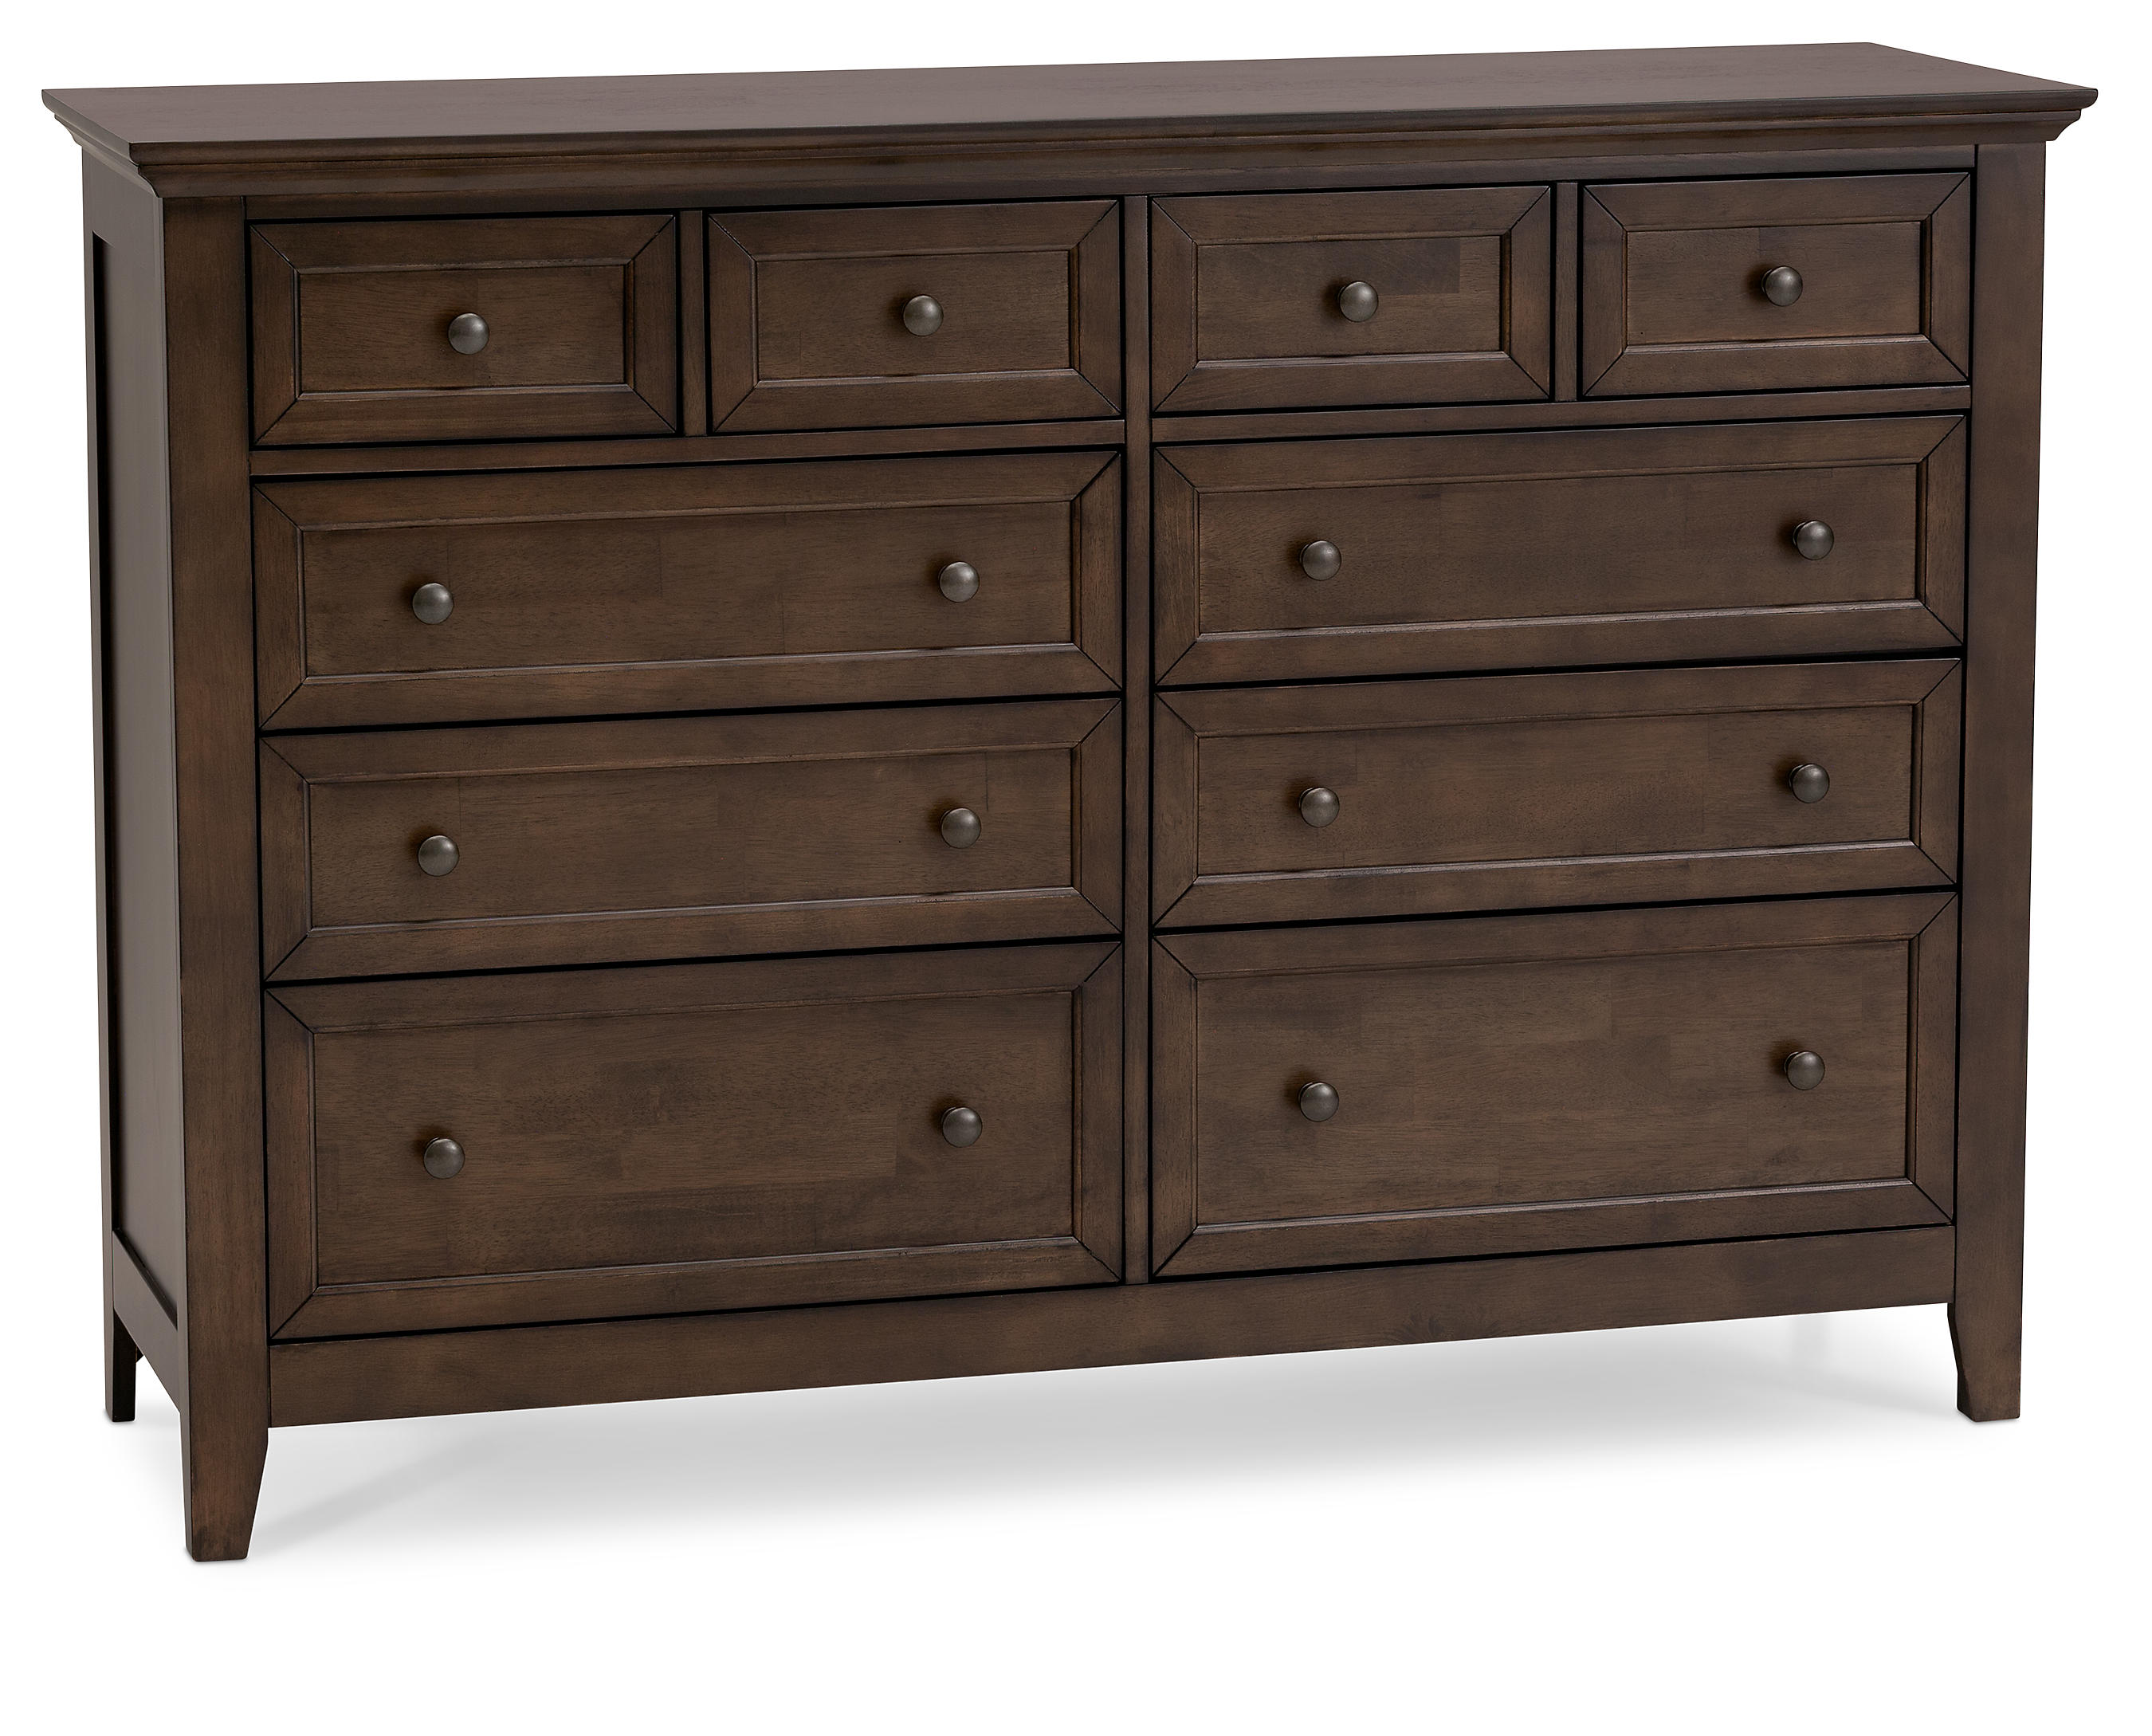 Bering Dresser Furniture Row, Pictures Of Dresser Drawers